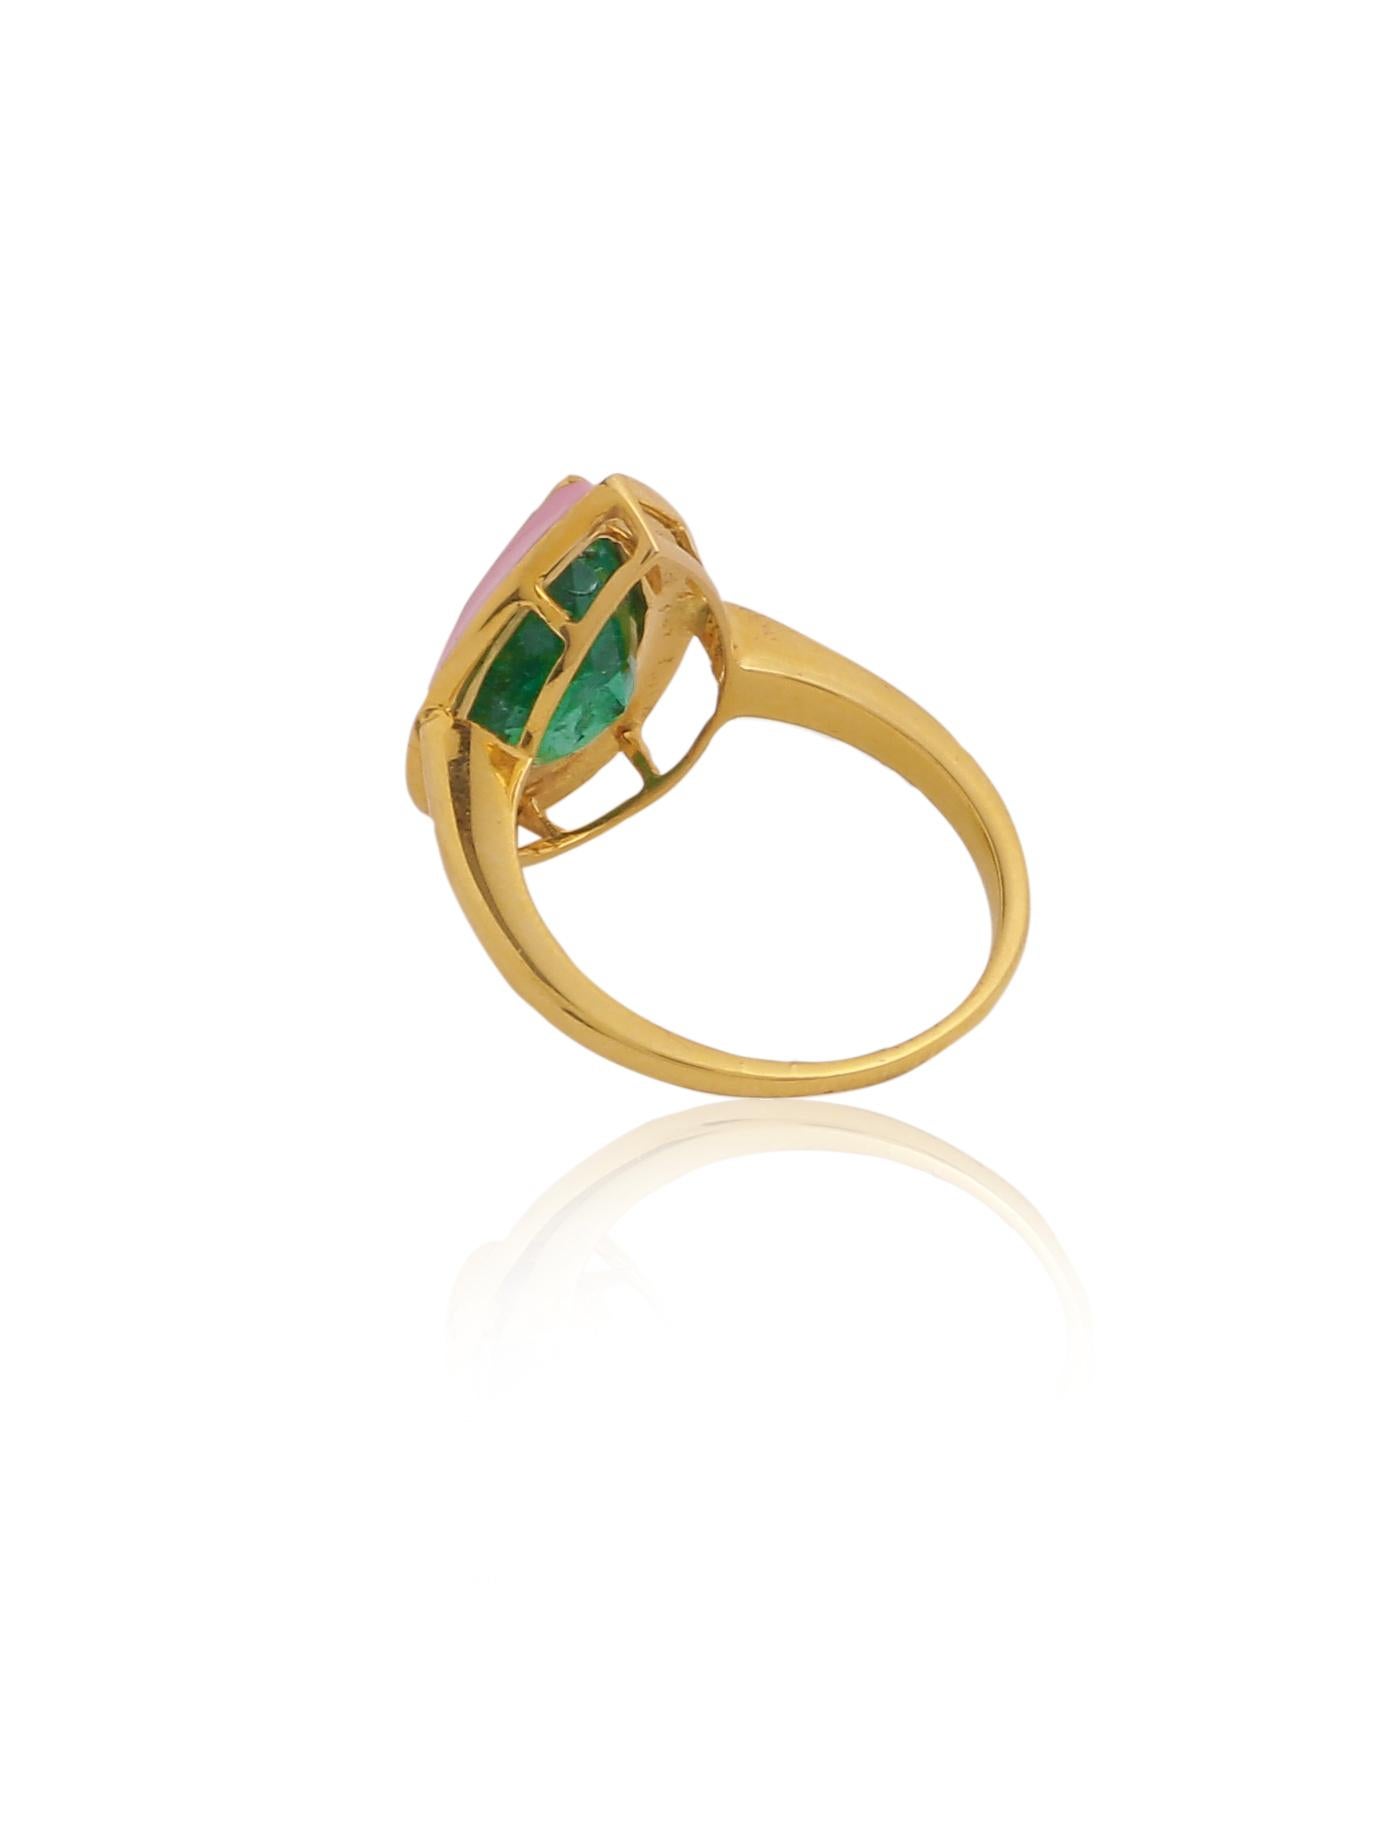 A simple and elegant Emerald ring with pink Enamel.
The natural pear shape emerald comes from Zambia, and is natural. The ring can be worn by women of all ages, and is an ideal gift for your loved ones. 
The piece is made in 18K Gold by our trained